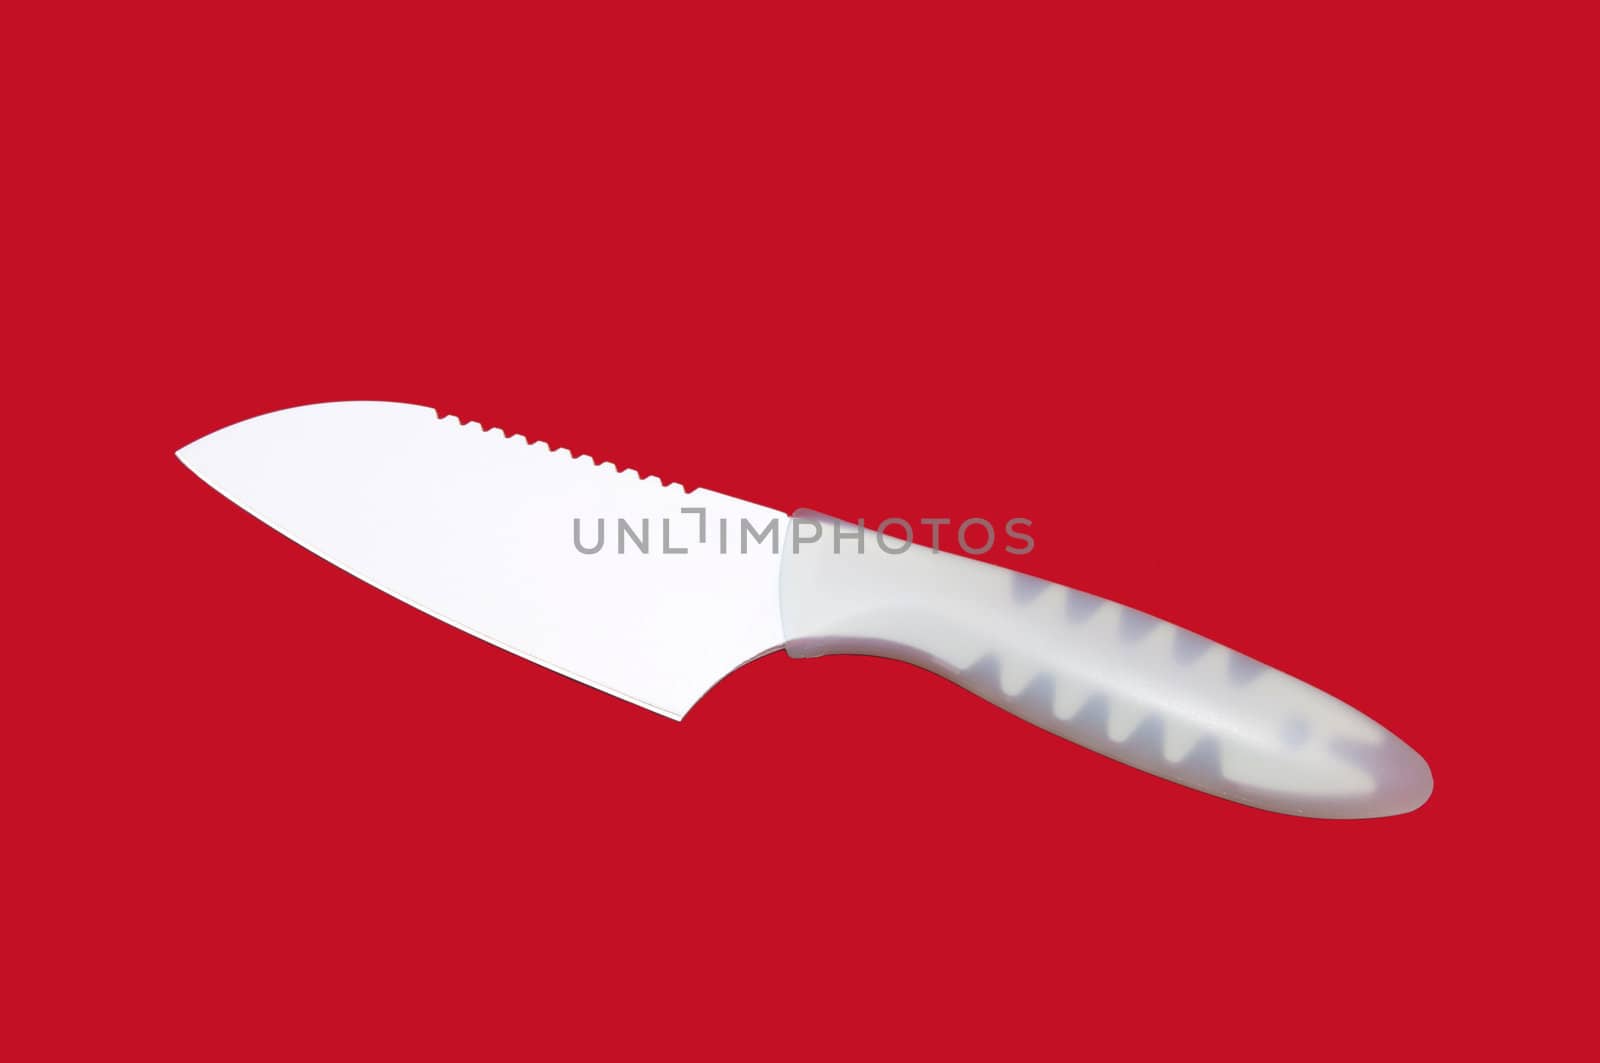 butcher knife with a ceramic coating on a red background